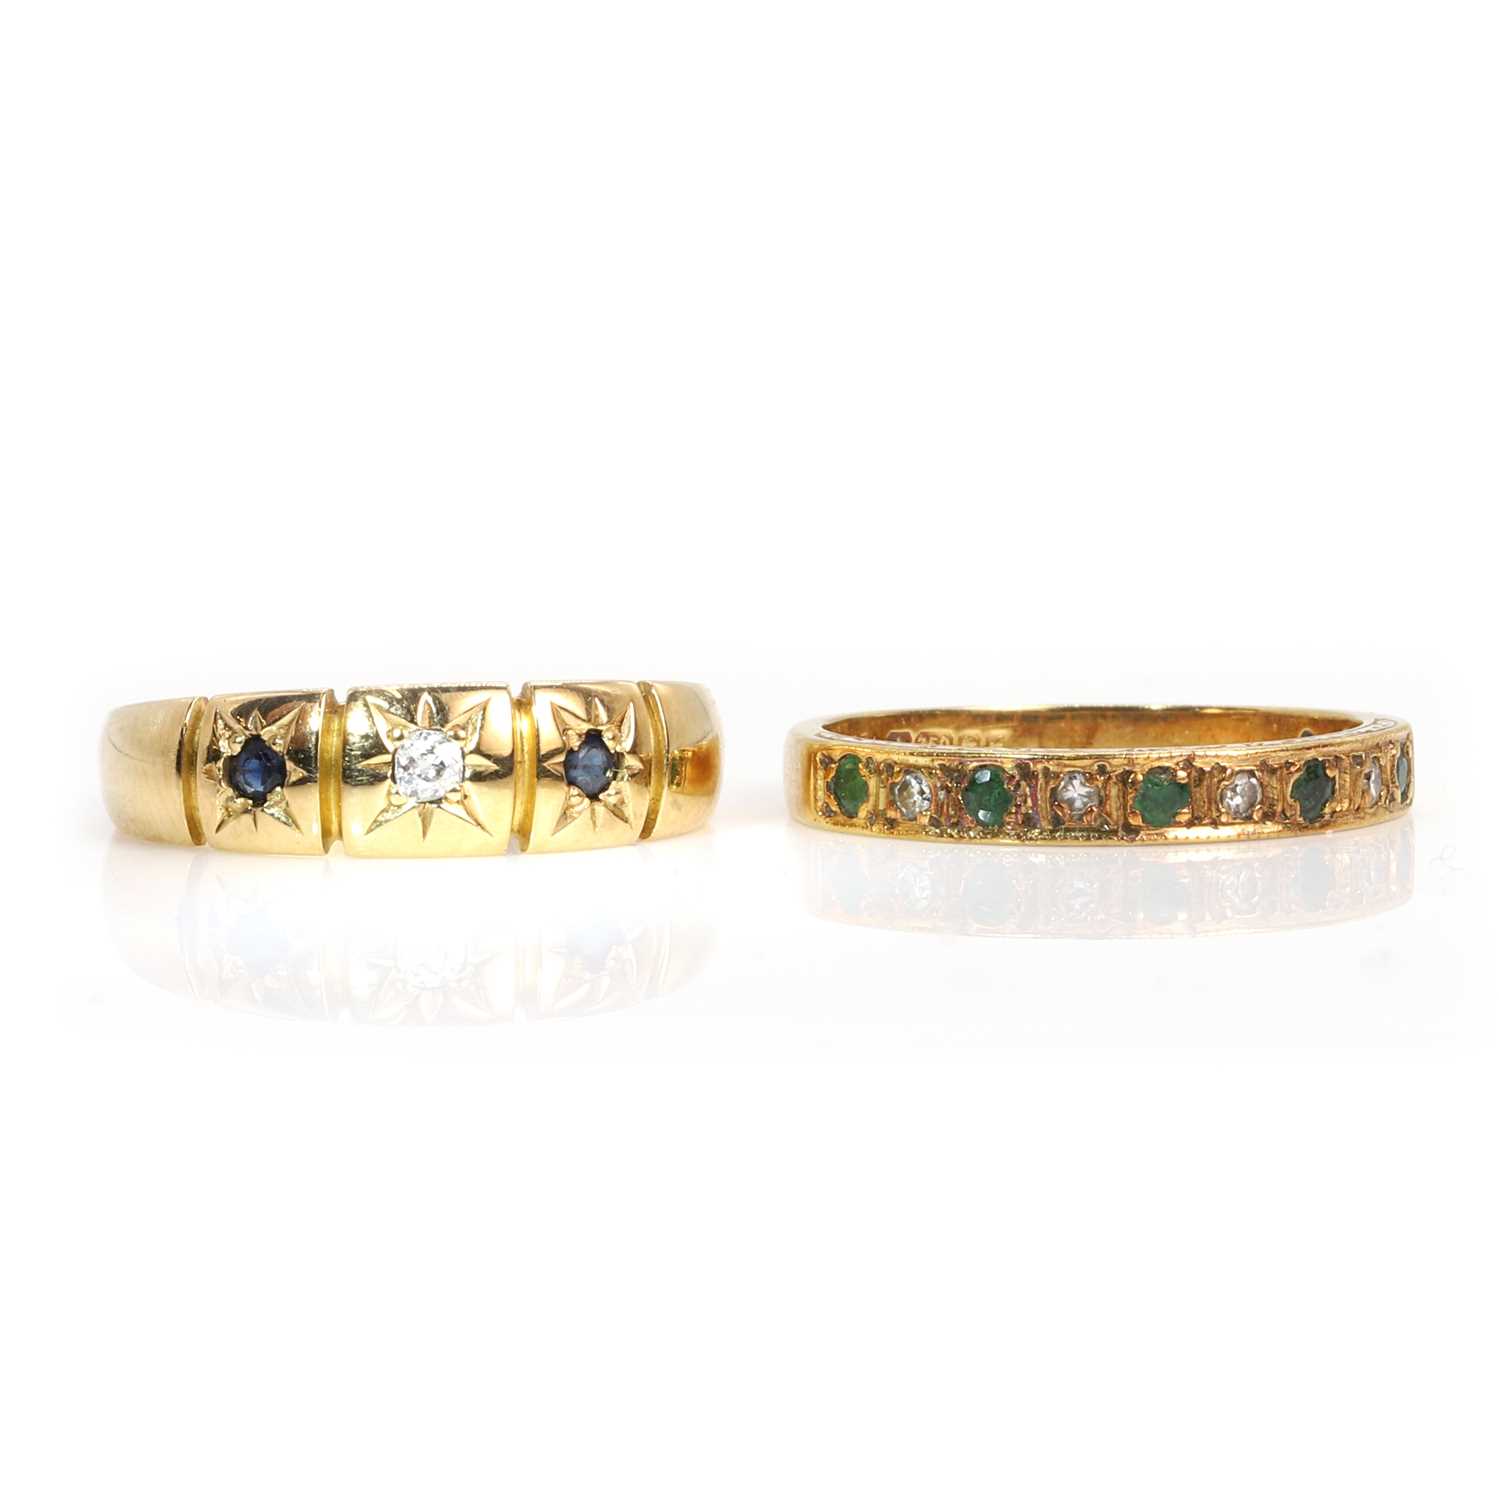 An antique 18ct gold gypsy ring and a half-eternity ring,